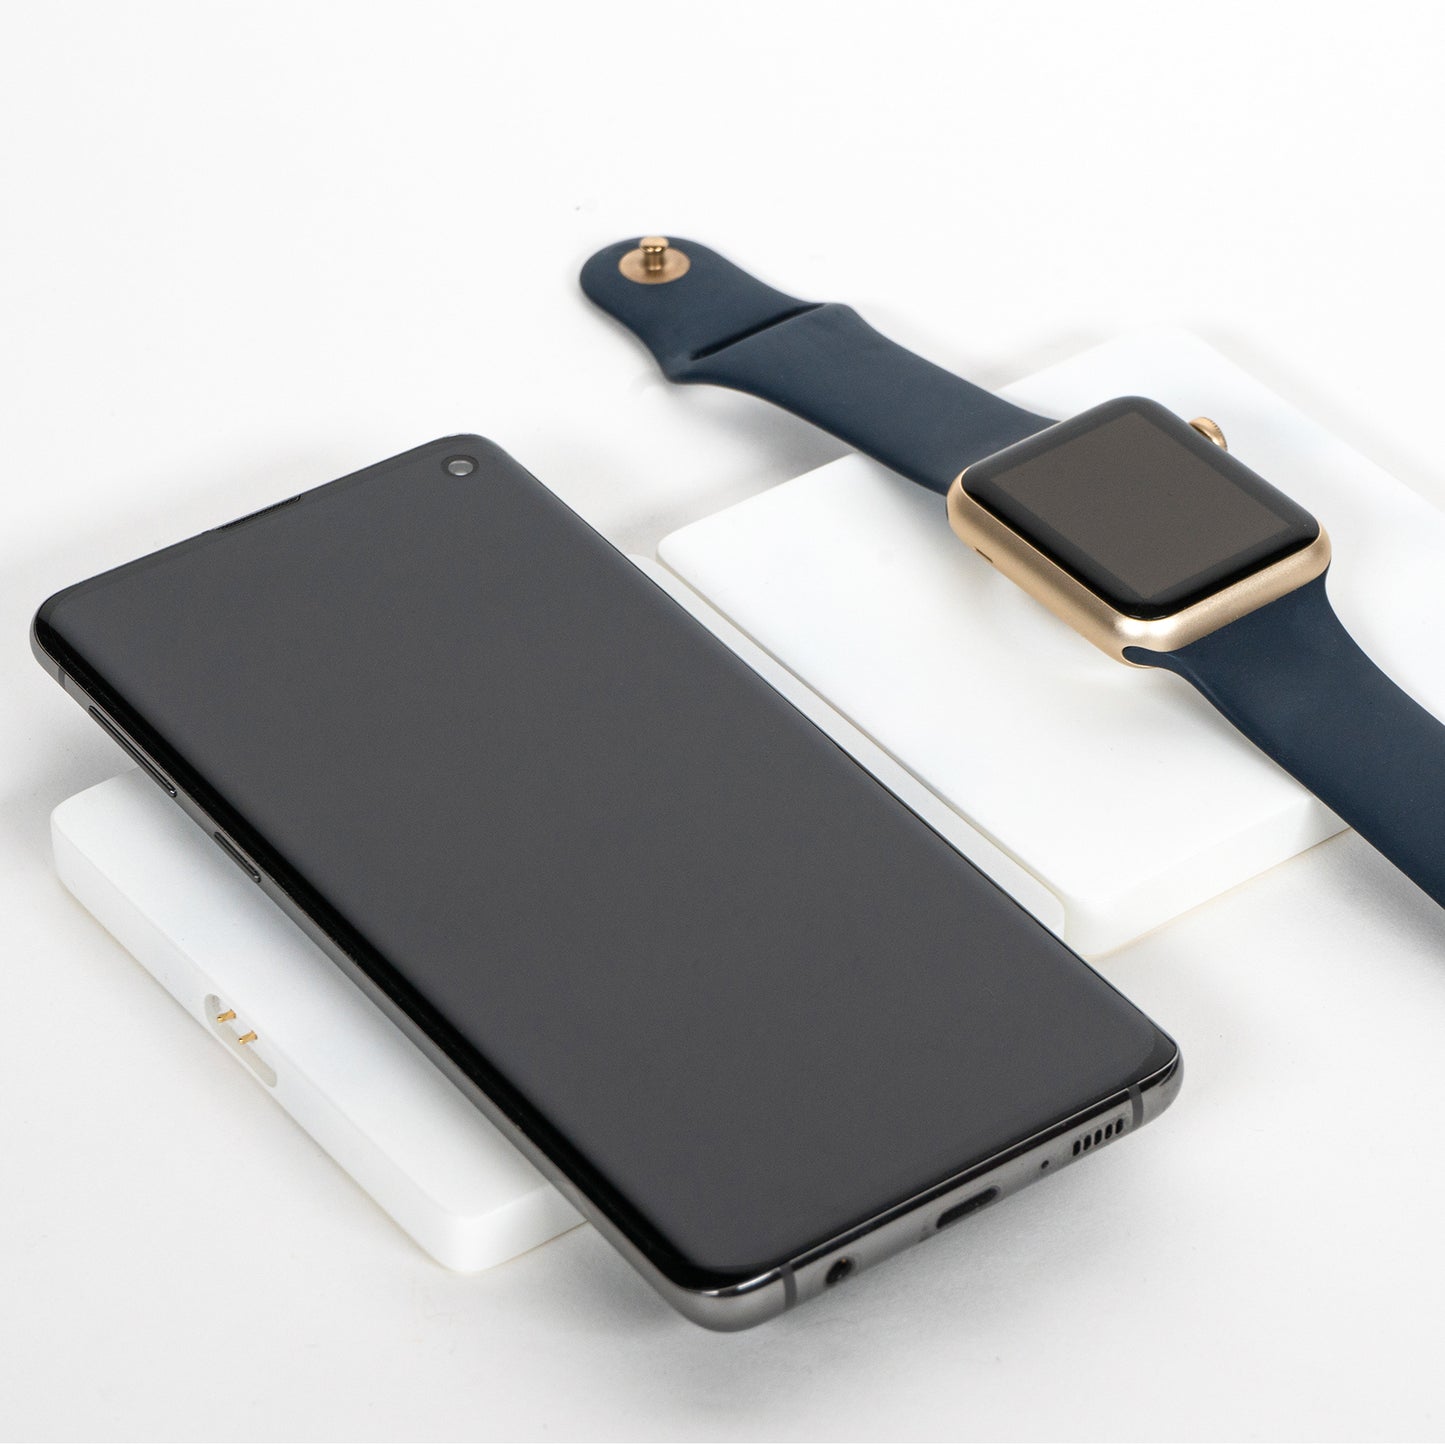 Connect it - Wireless Apple watch charger - Lyra